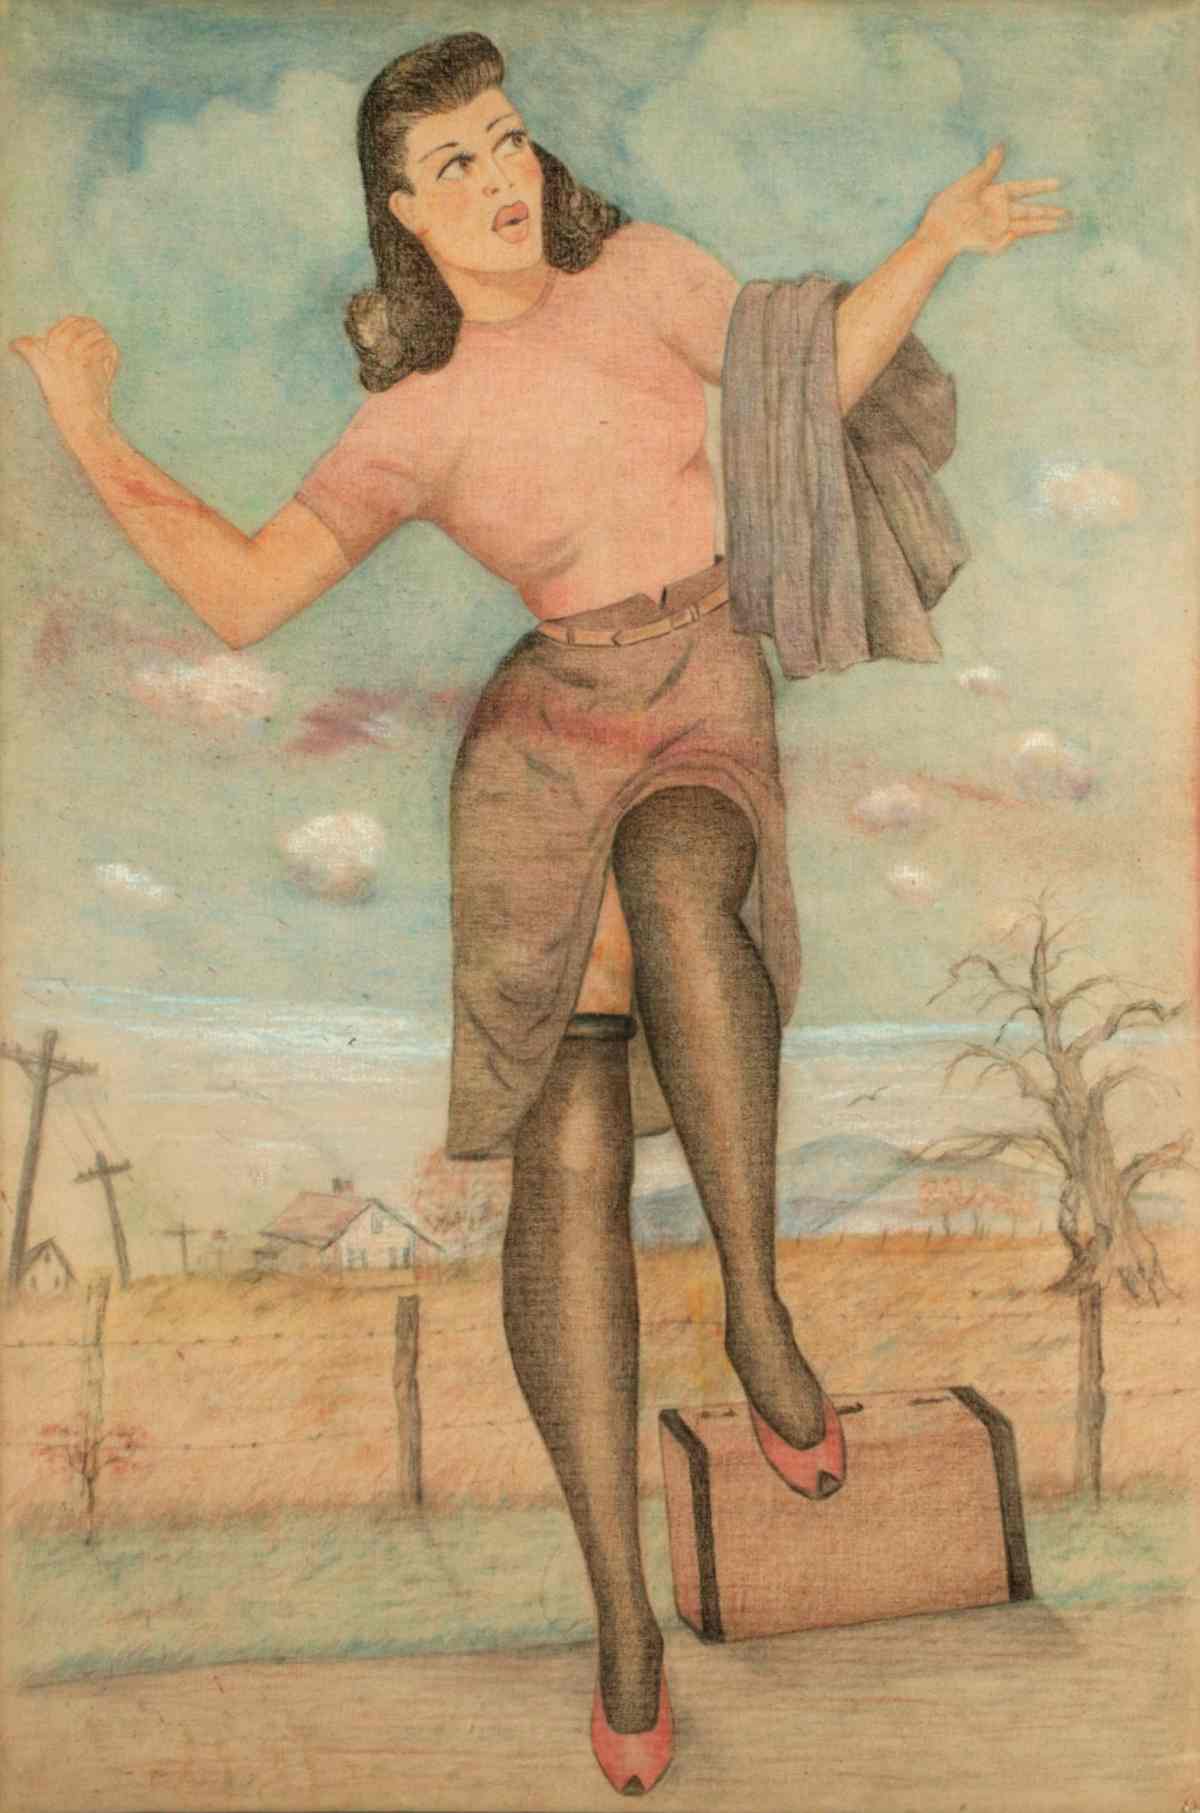 CIRCA 1940 OIL ON CLOTH PAINTING 'HITCHN A RIDE'